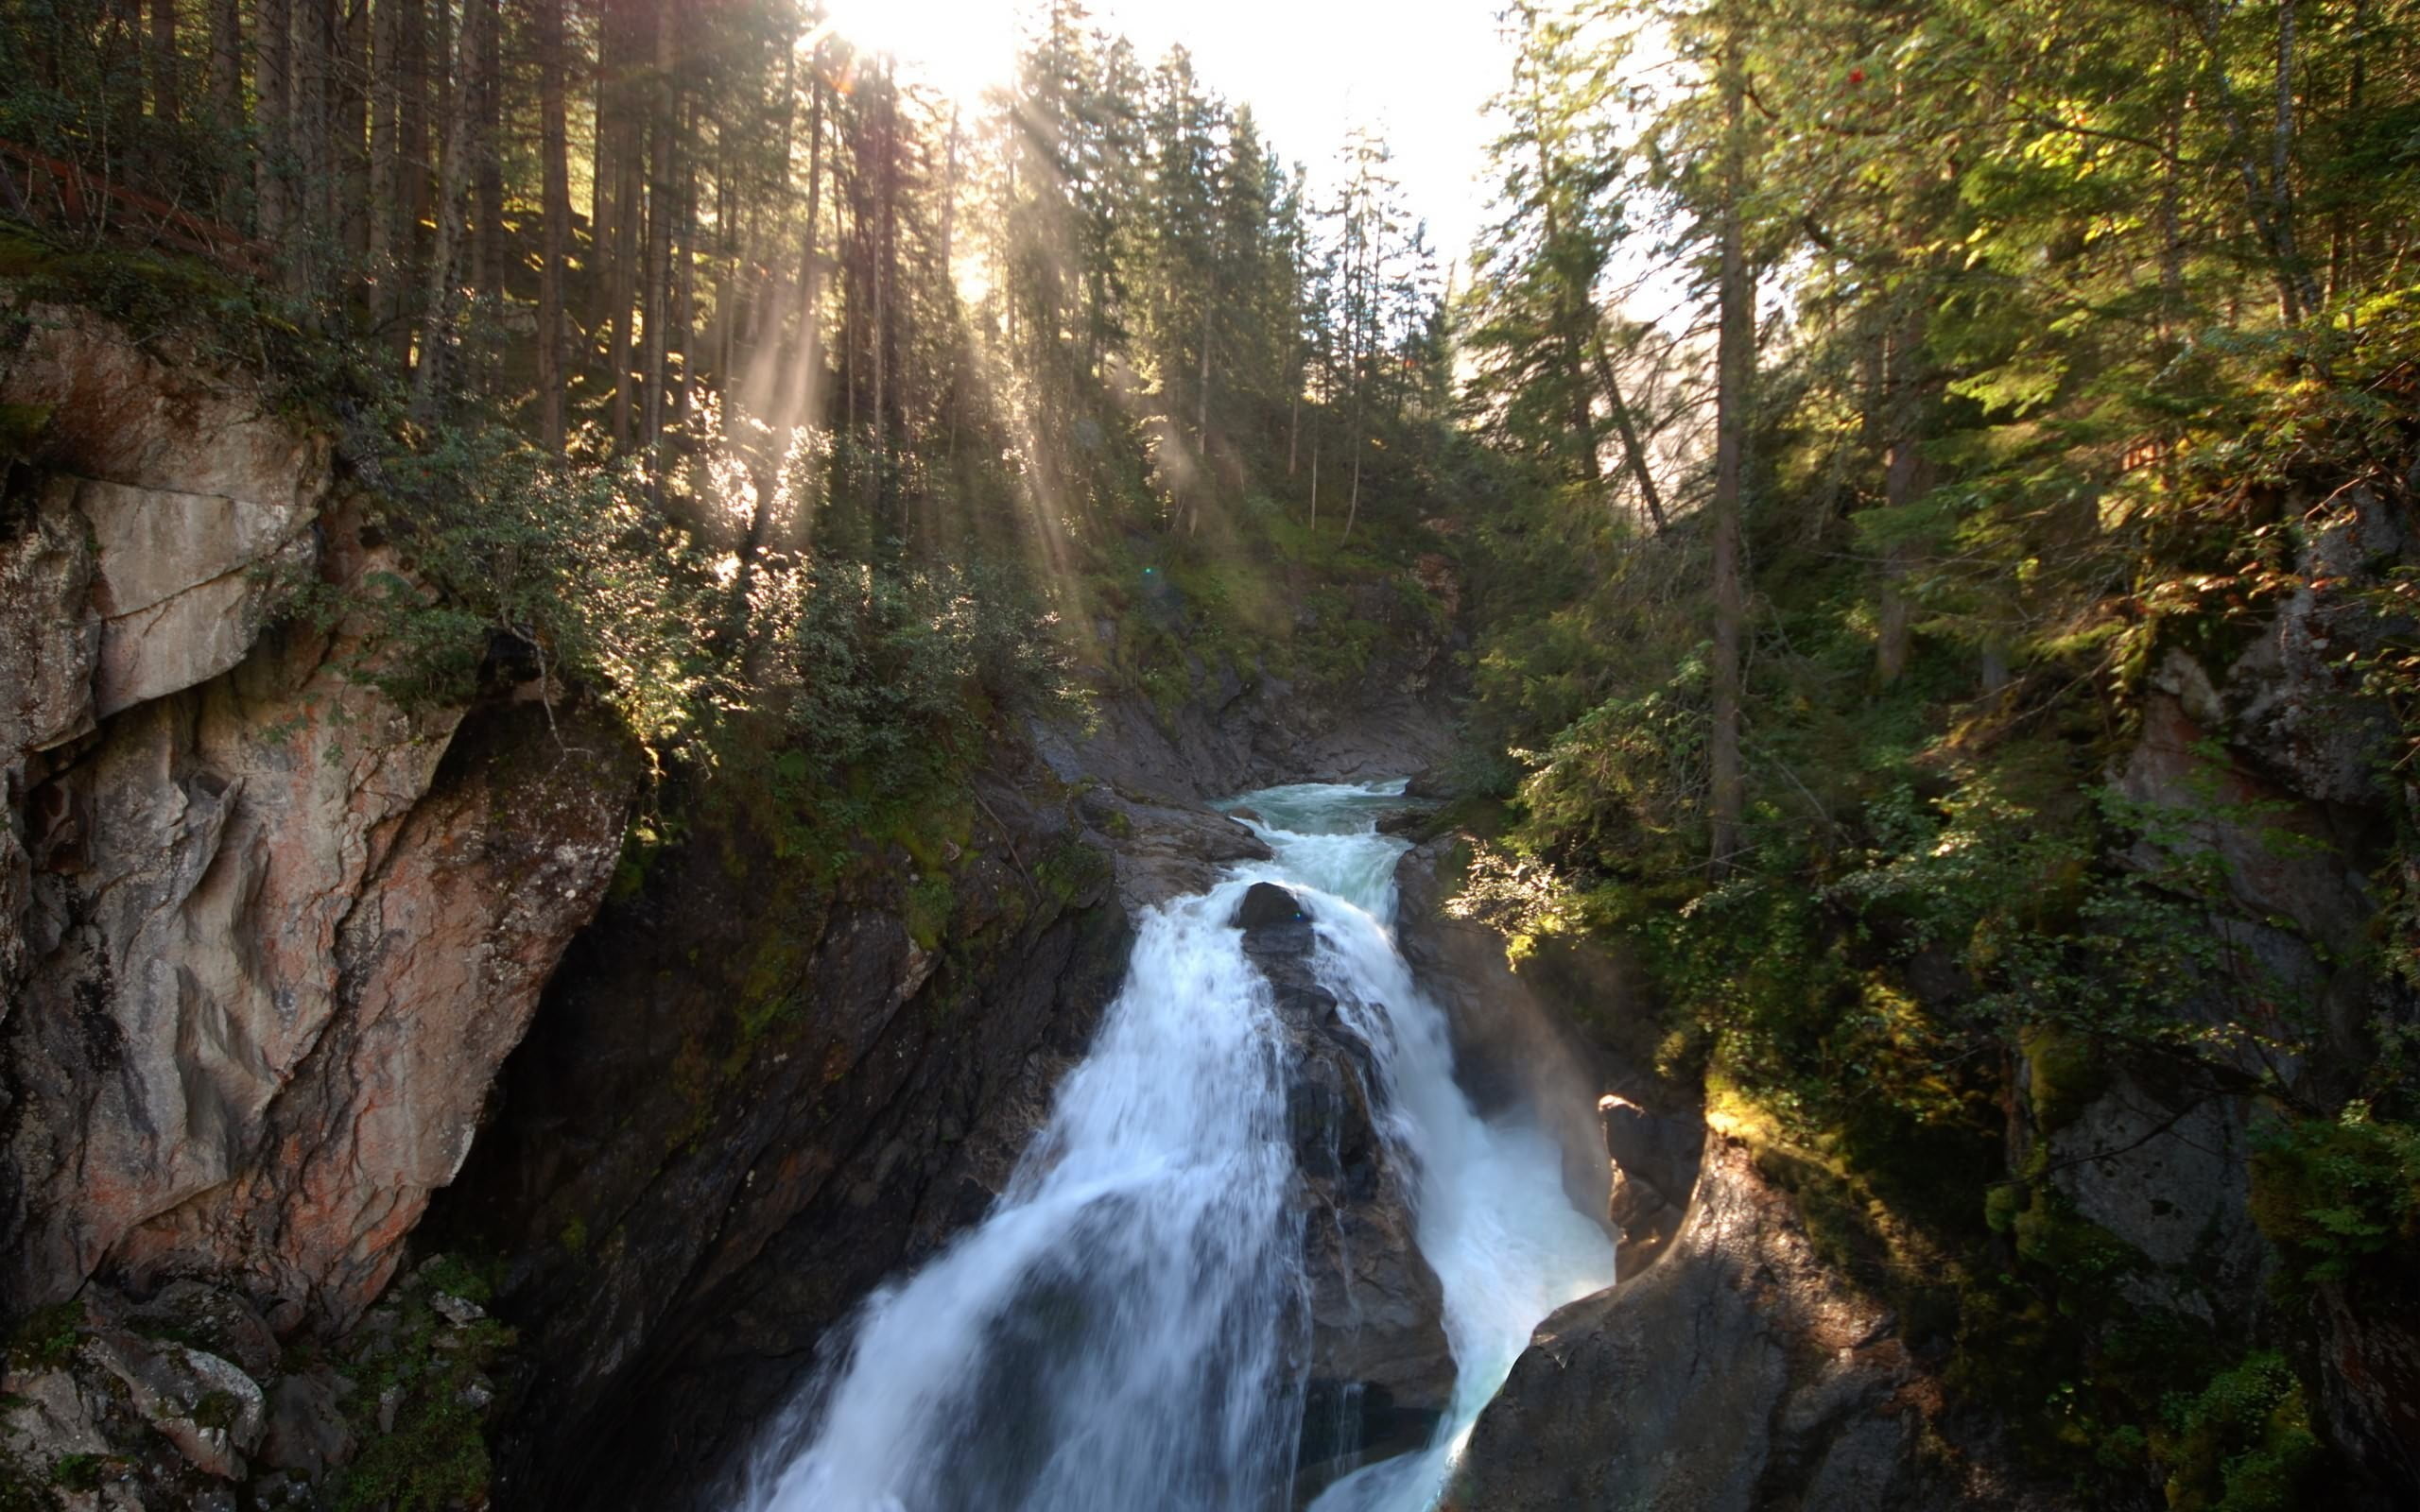 waterfalls, nature, Sun, landscape, sun rays, forest, trees, beauty in nature